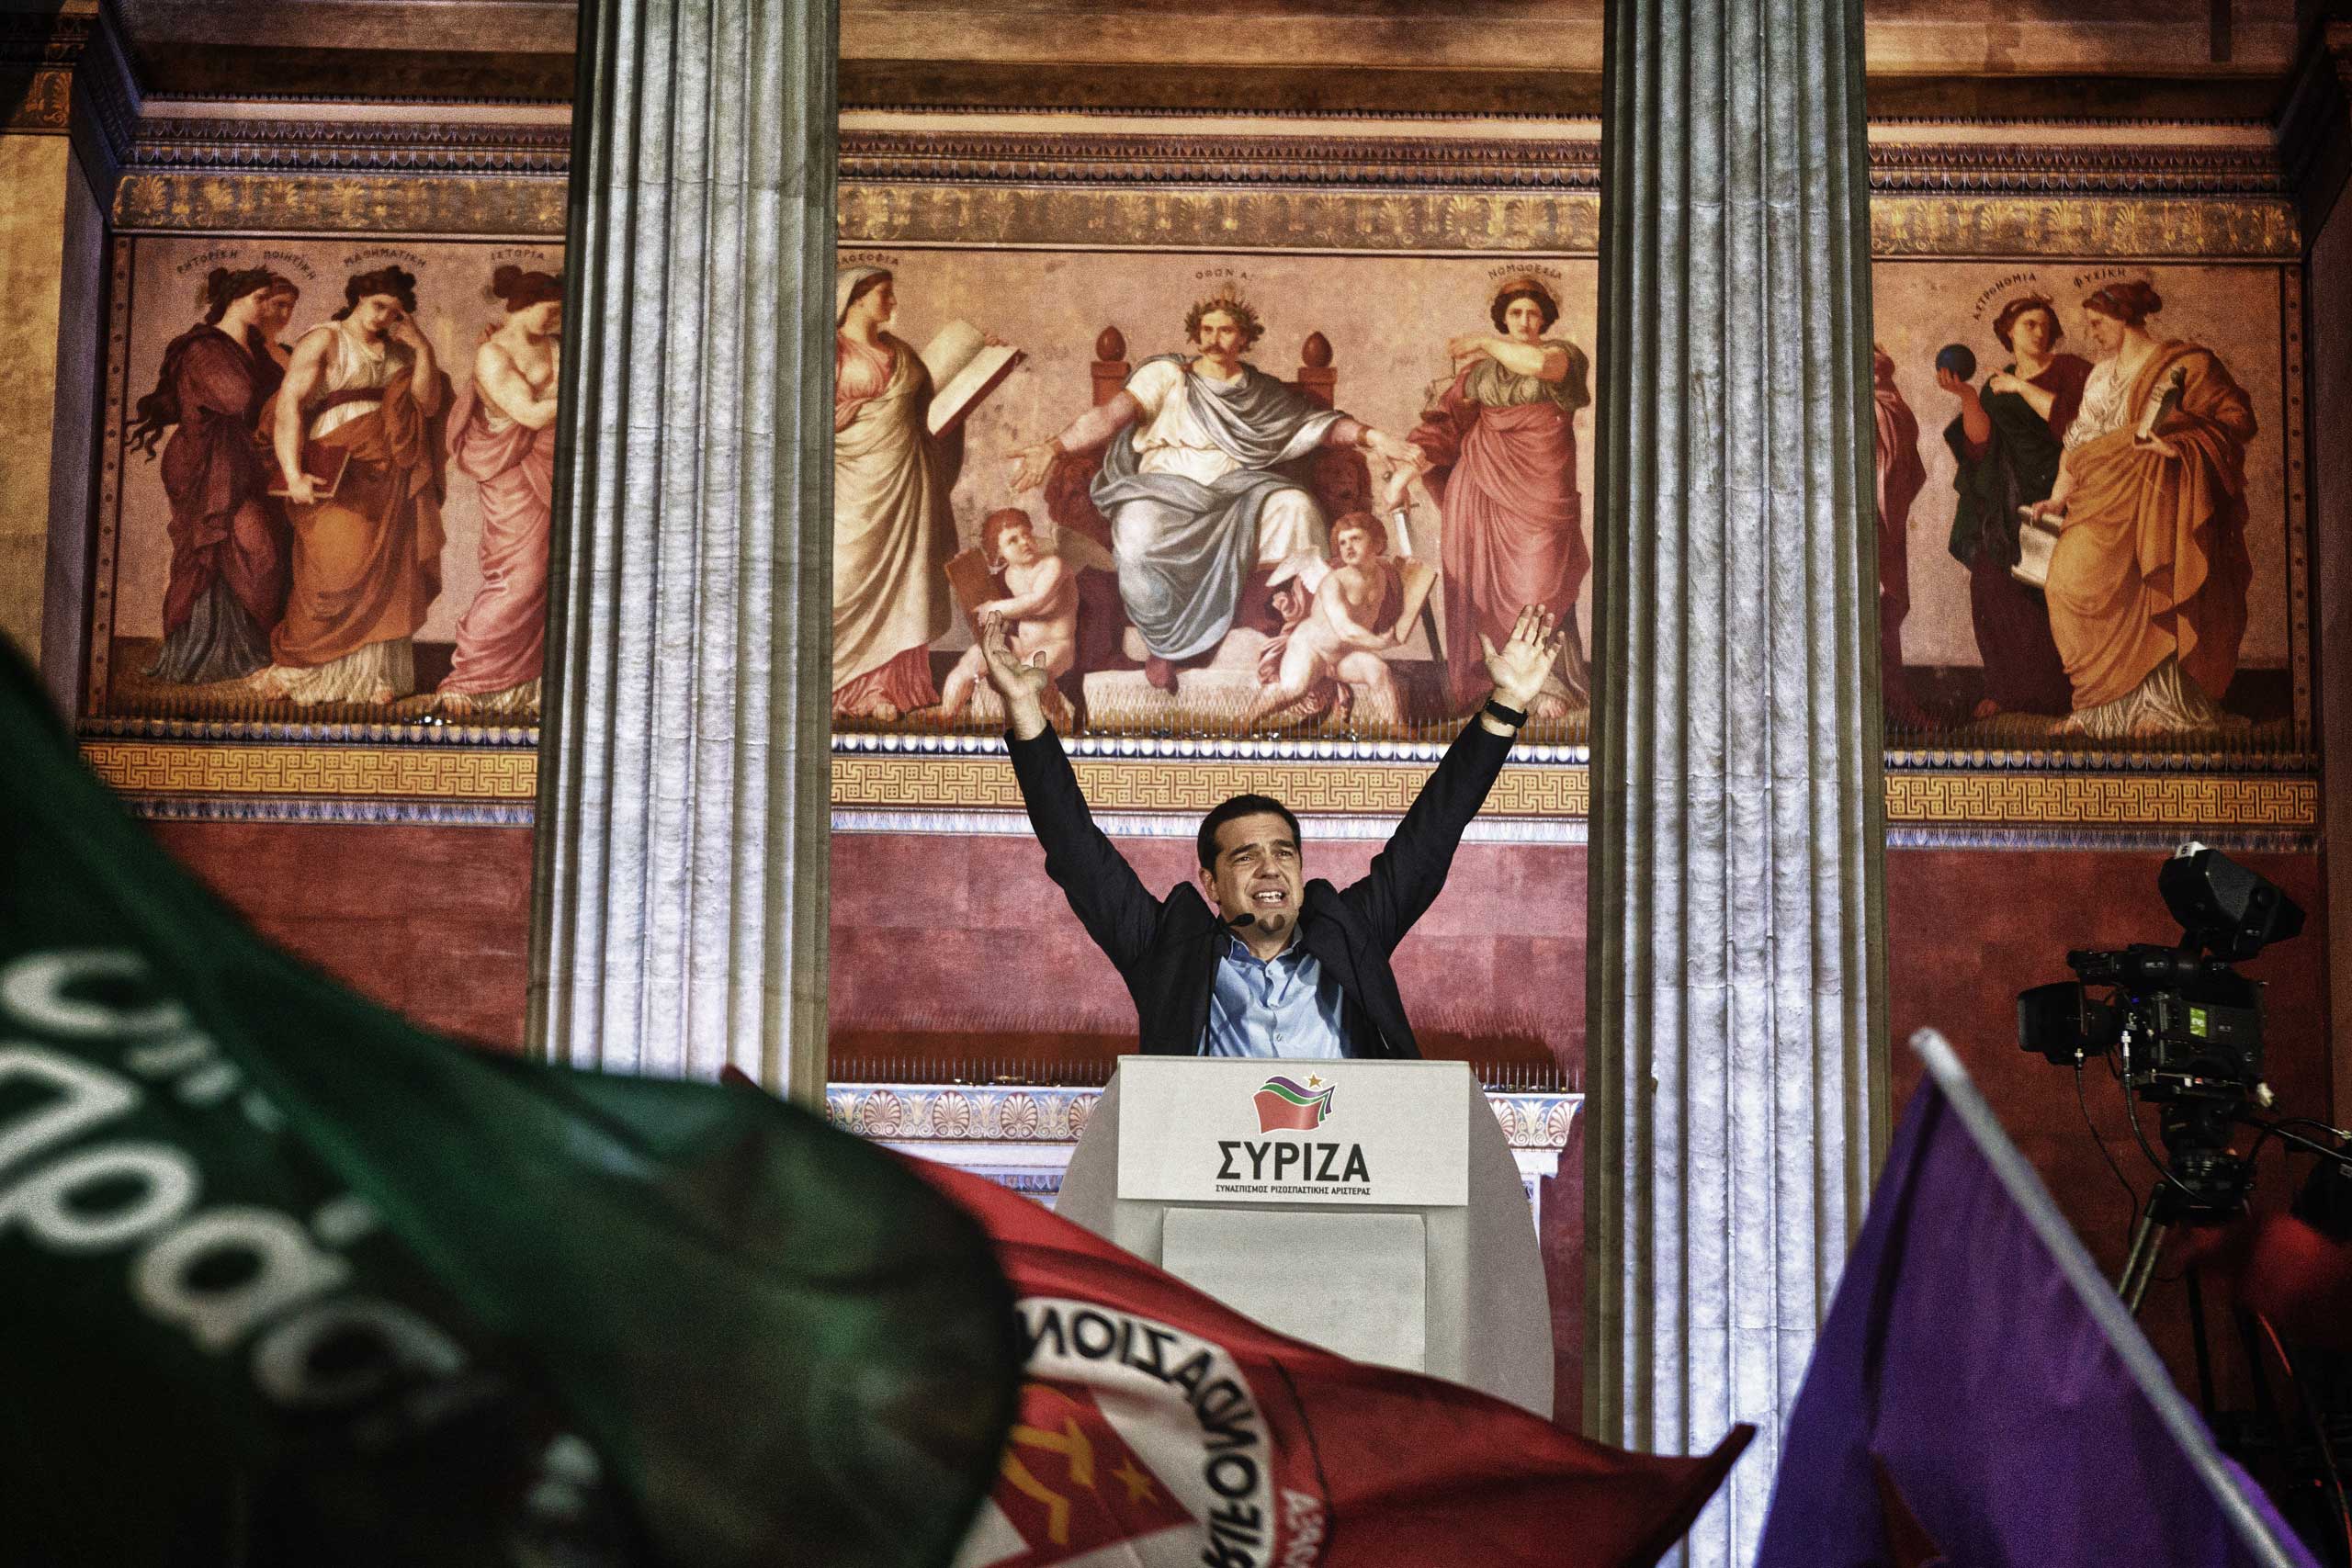 Leader of Syriza party Alexis Tsipras, during his victory speech in Athens, Jan. 25, 2015. (Nikos Pilos—laif/Redux)